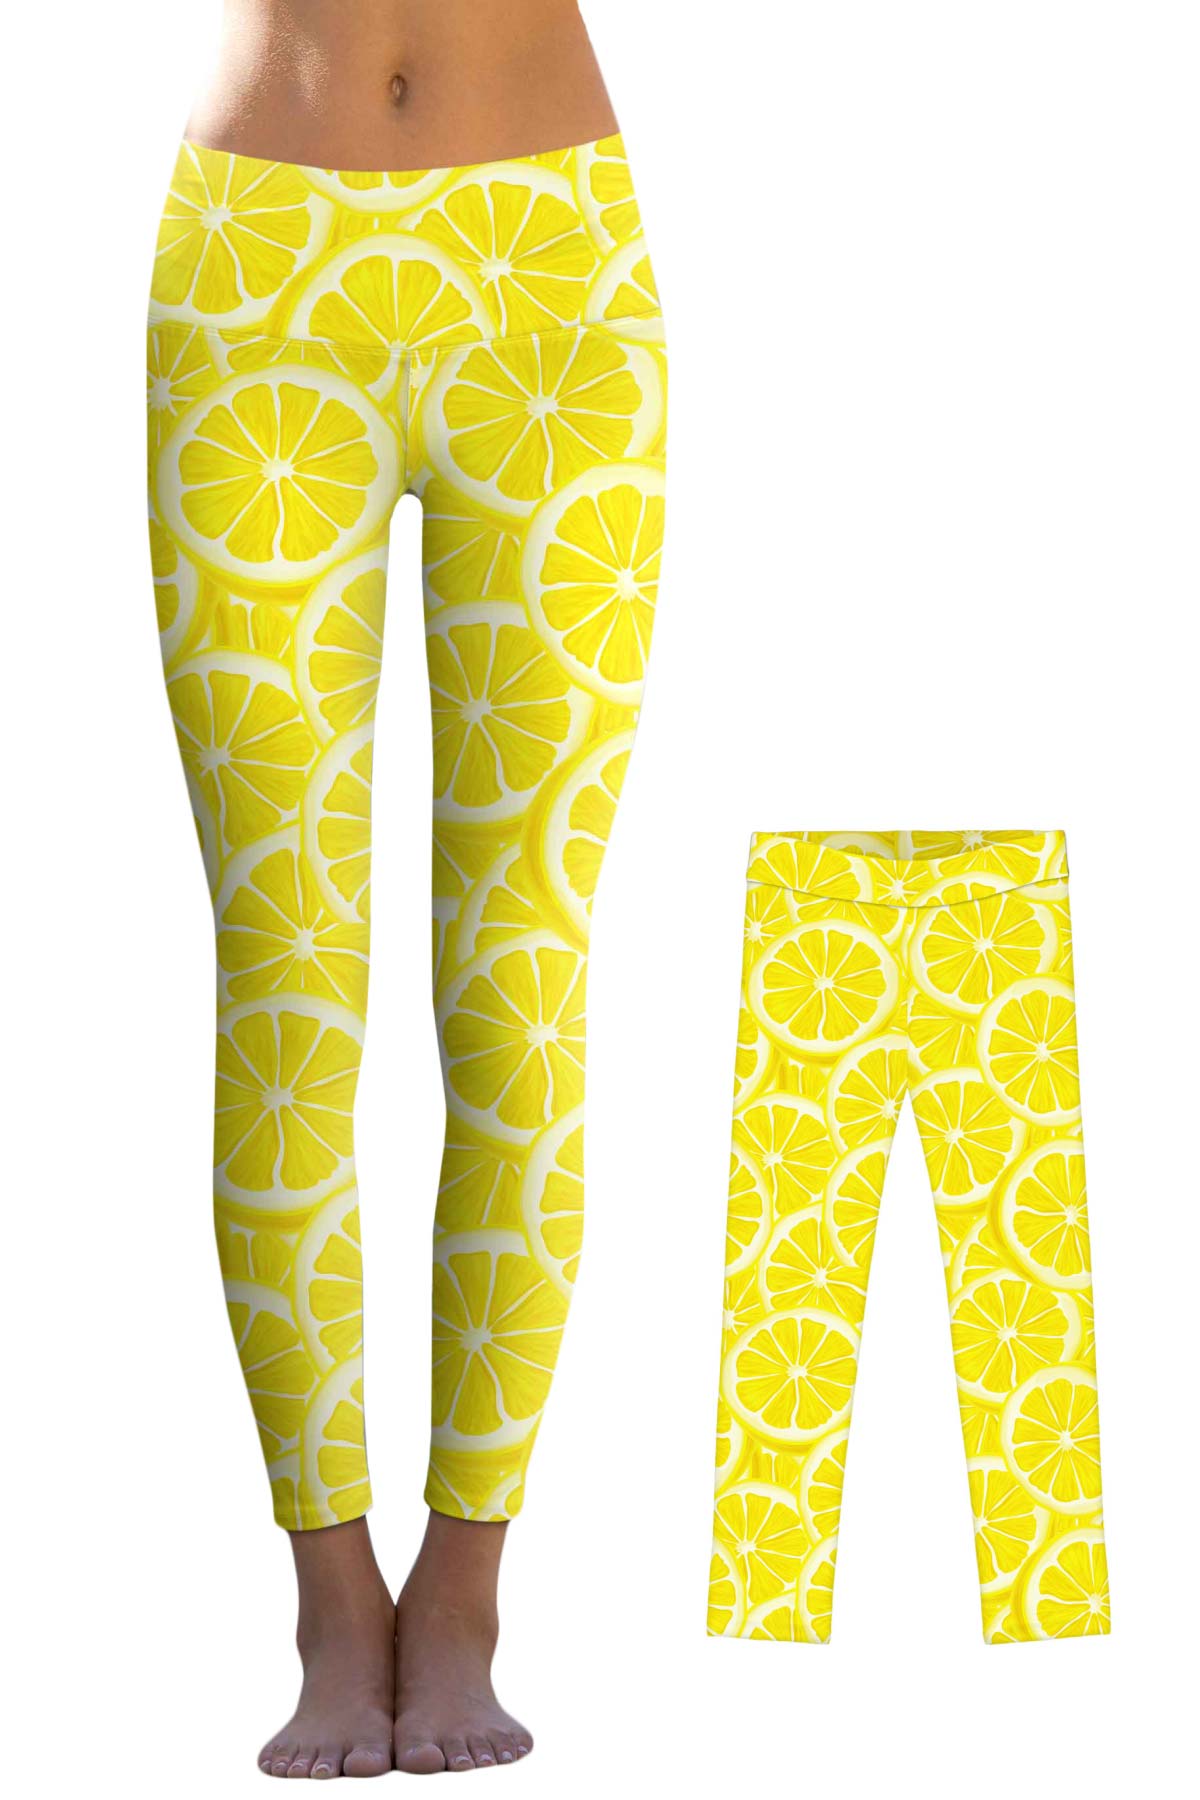 A Piece of Sun Lucy Yellow Lemon Print Cute Leggings - Mommy and Me - Pineapple Clothing